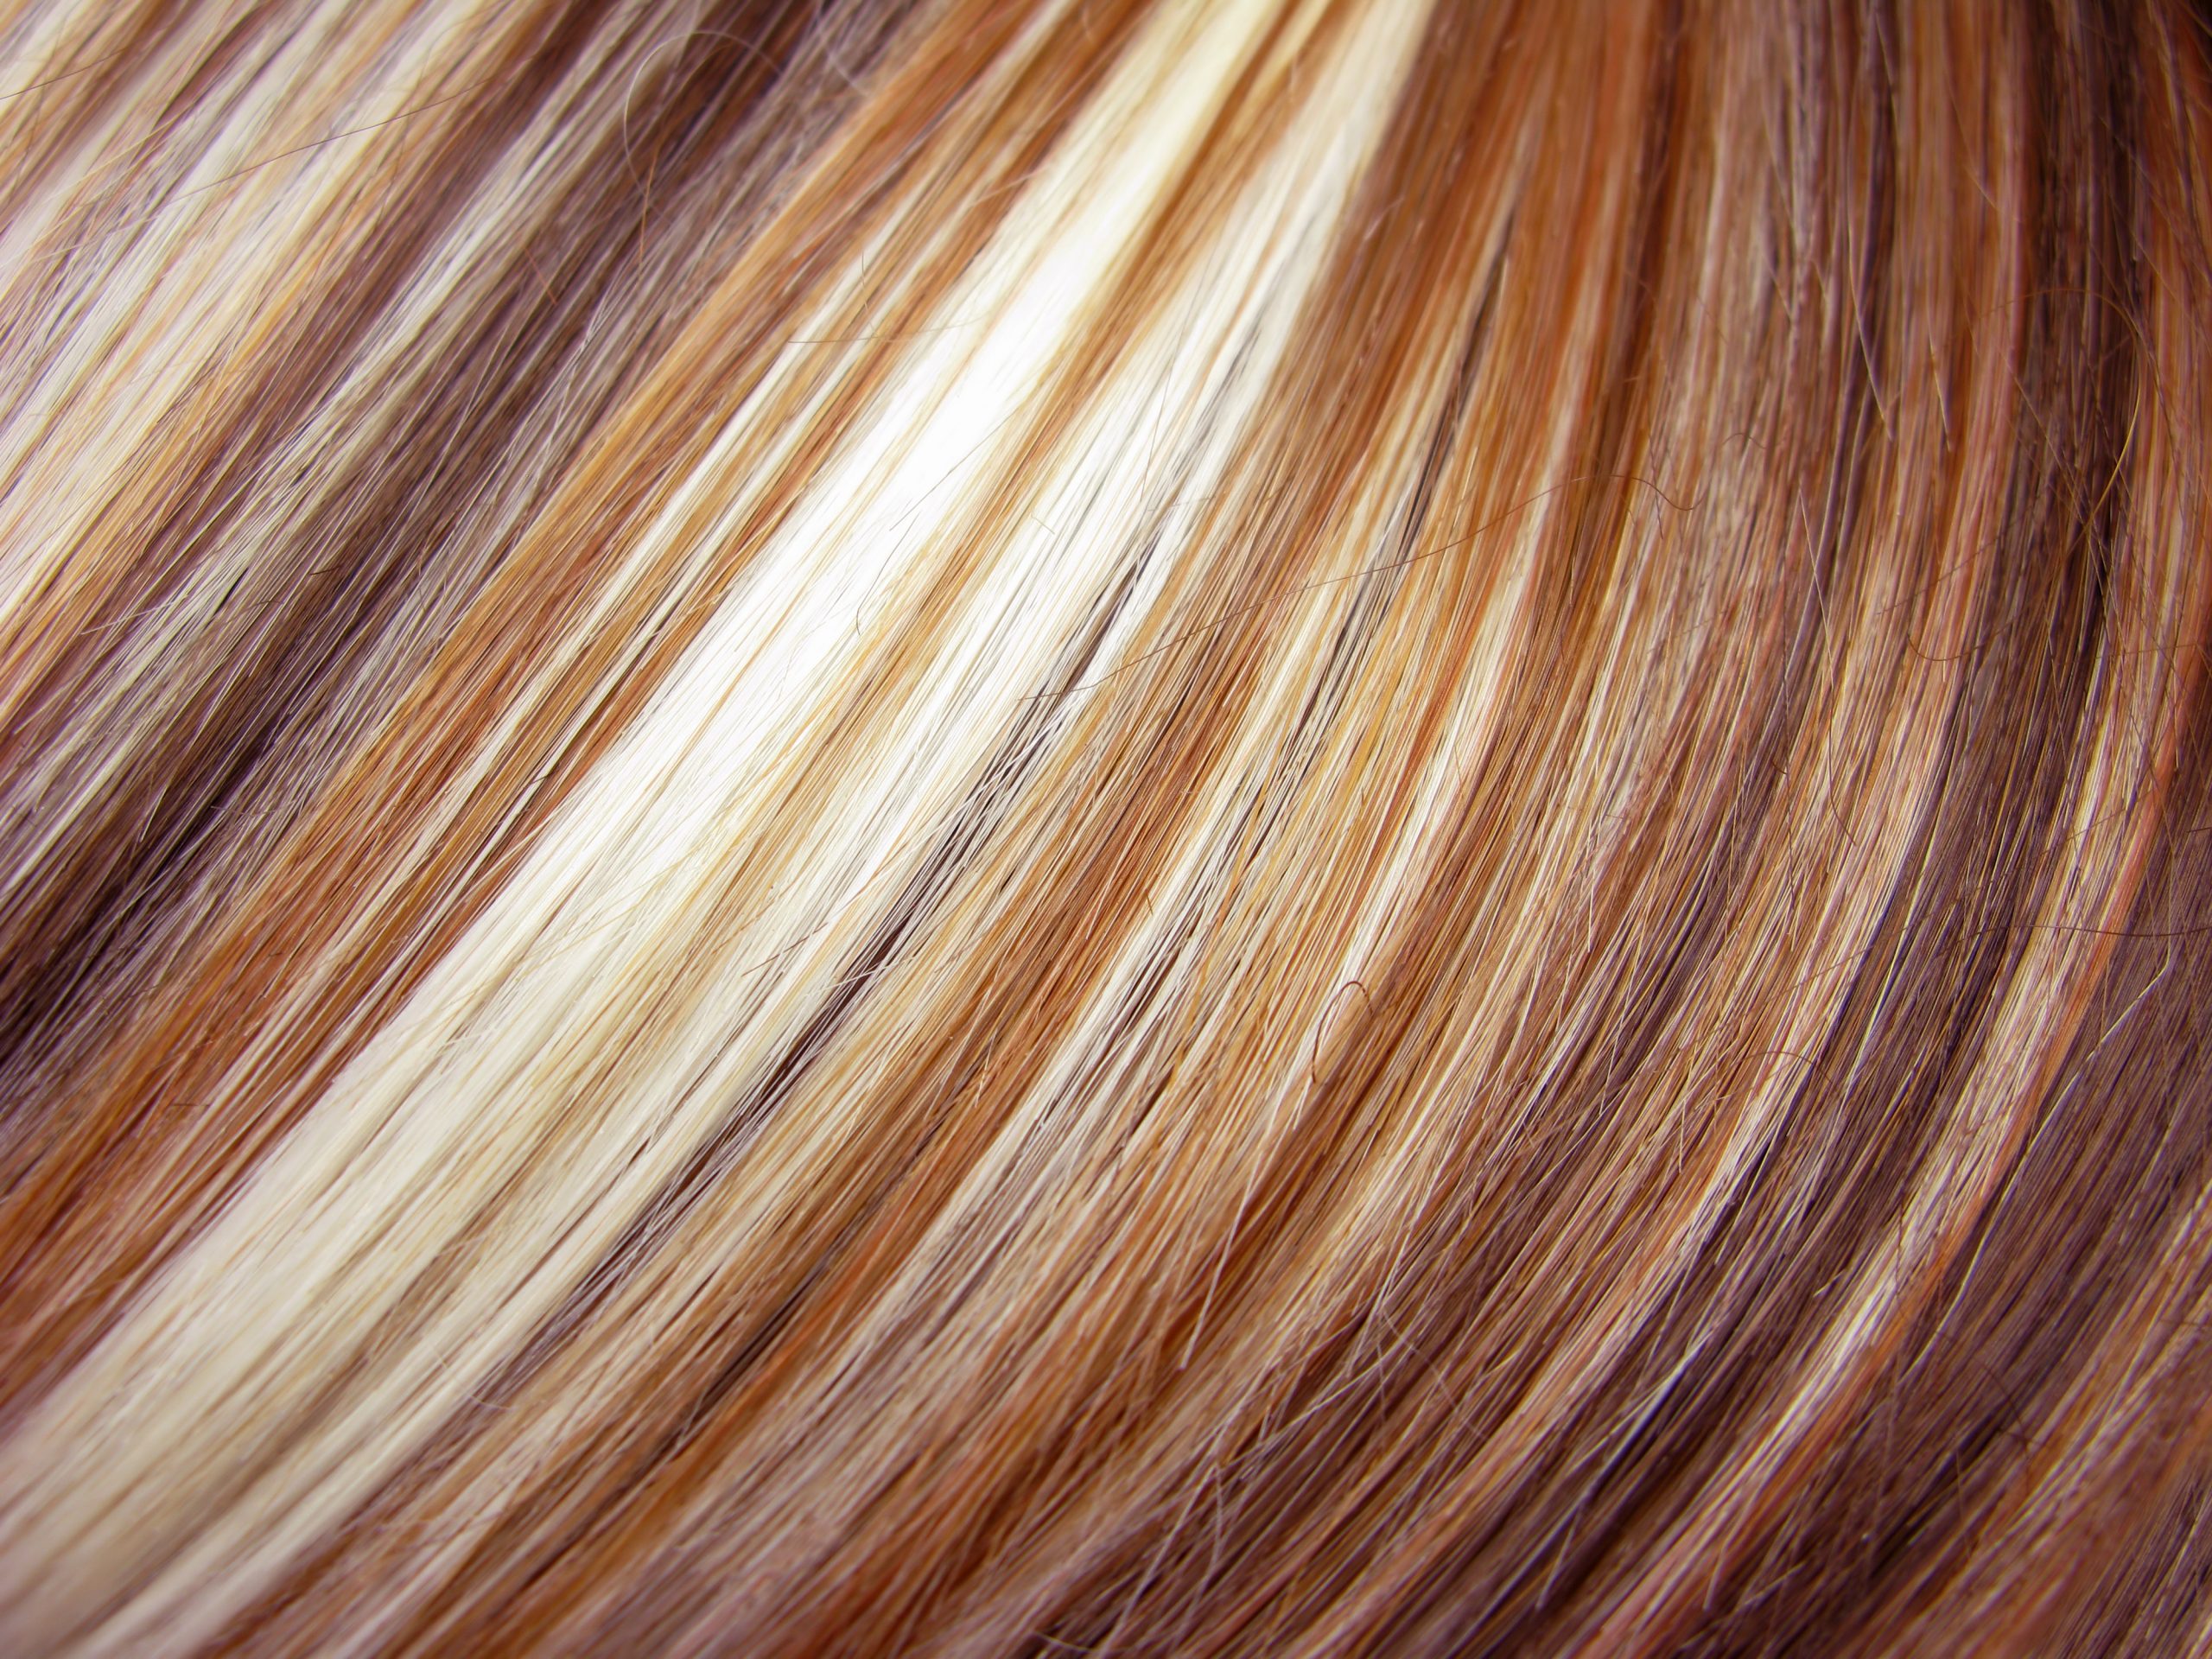 An image of many colors of hair possible at a Mulino hair color salon